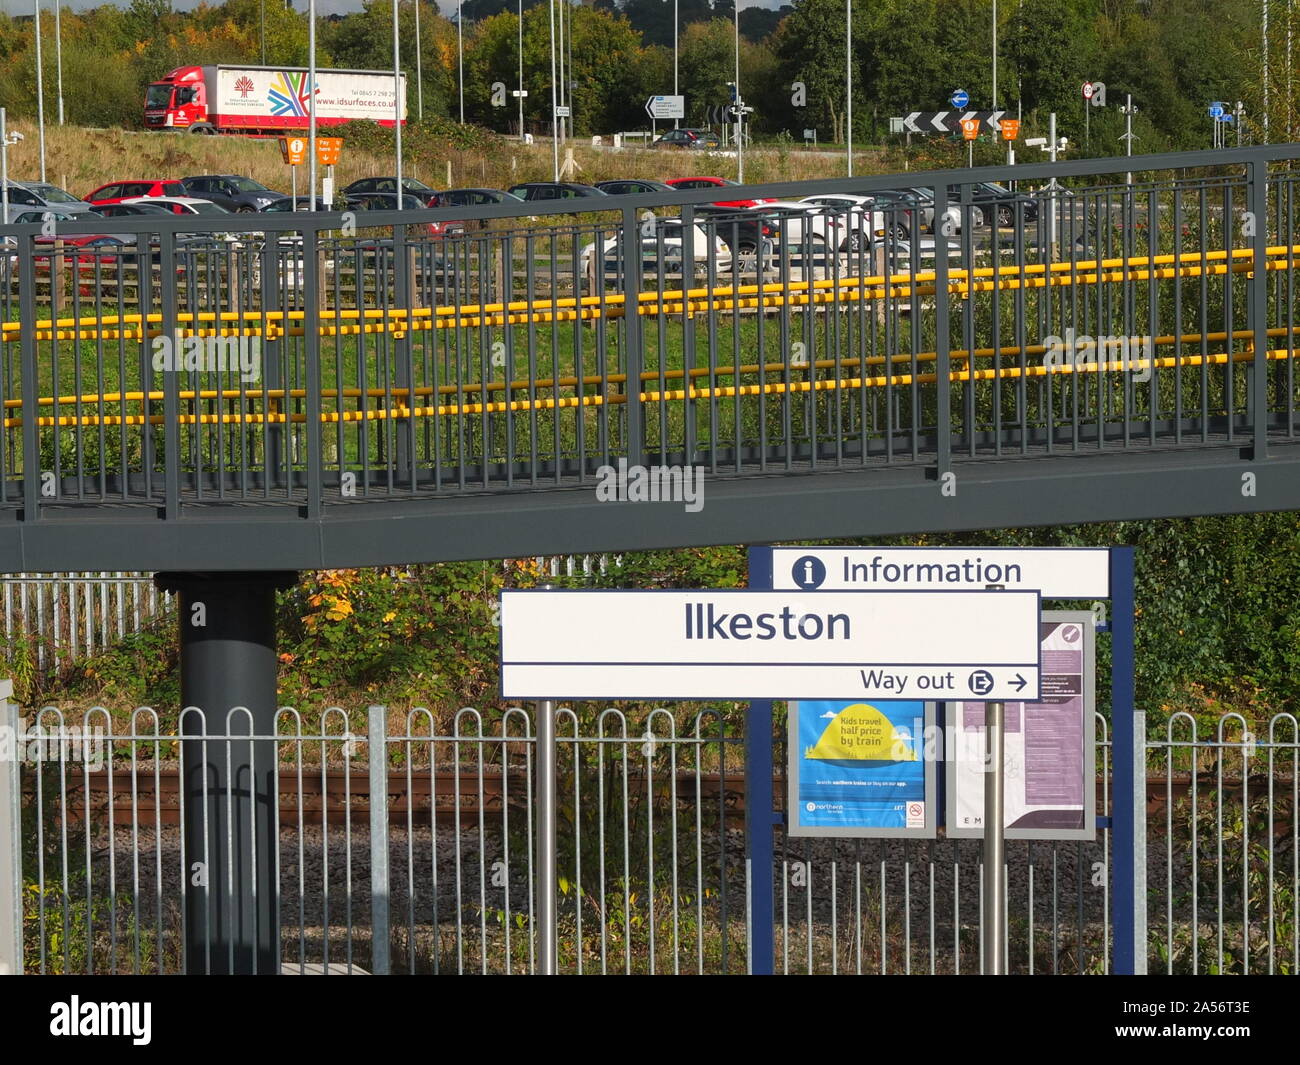 Ilkeston Railway Station, Derbyshire opened 2nd April 2017 after previous station closed in 1967. Ilkeston had Stock Photo